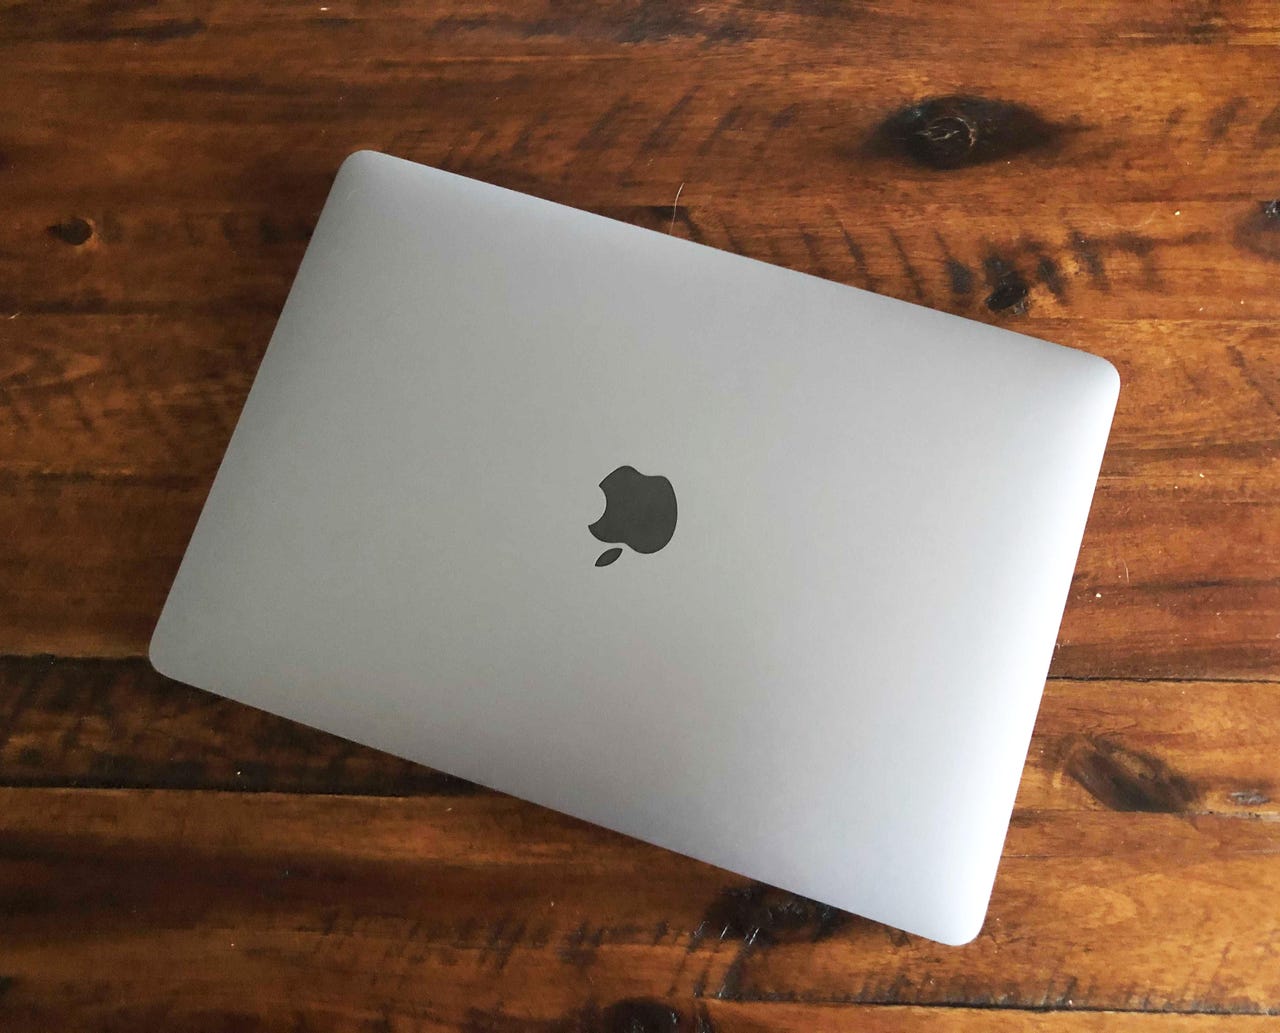 Living With the MacBook Air (M1)